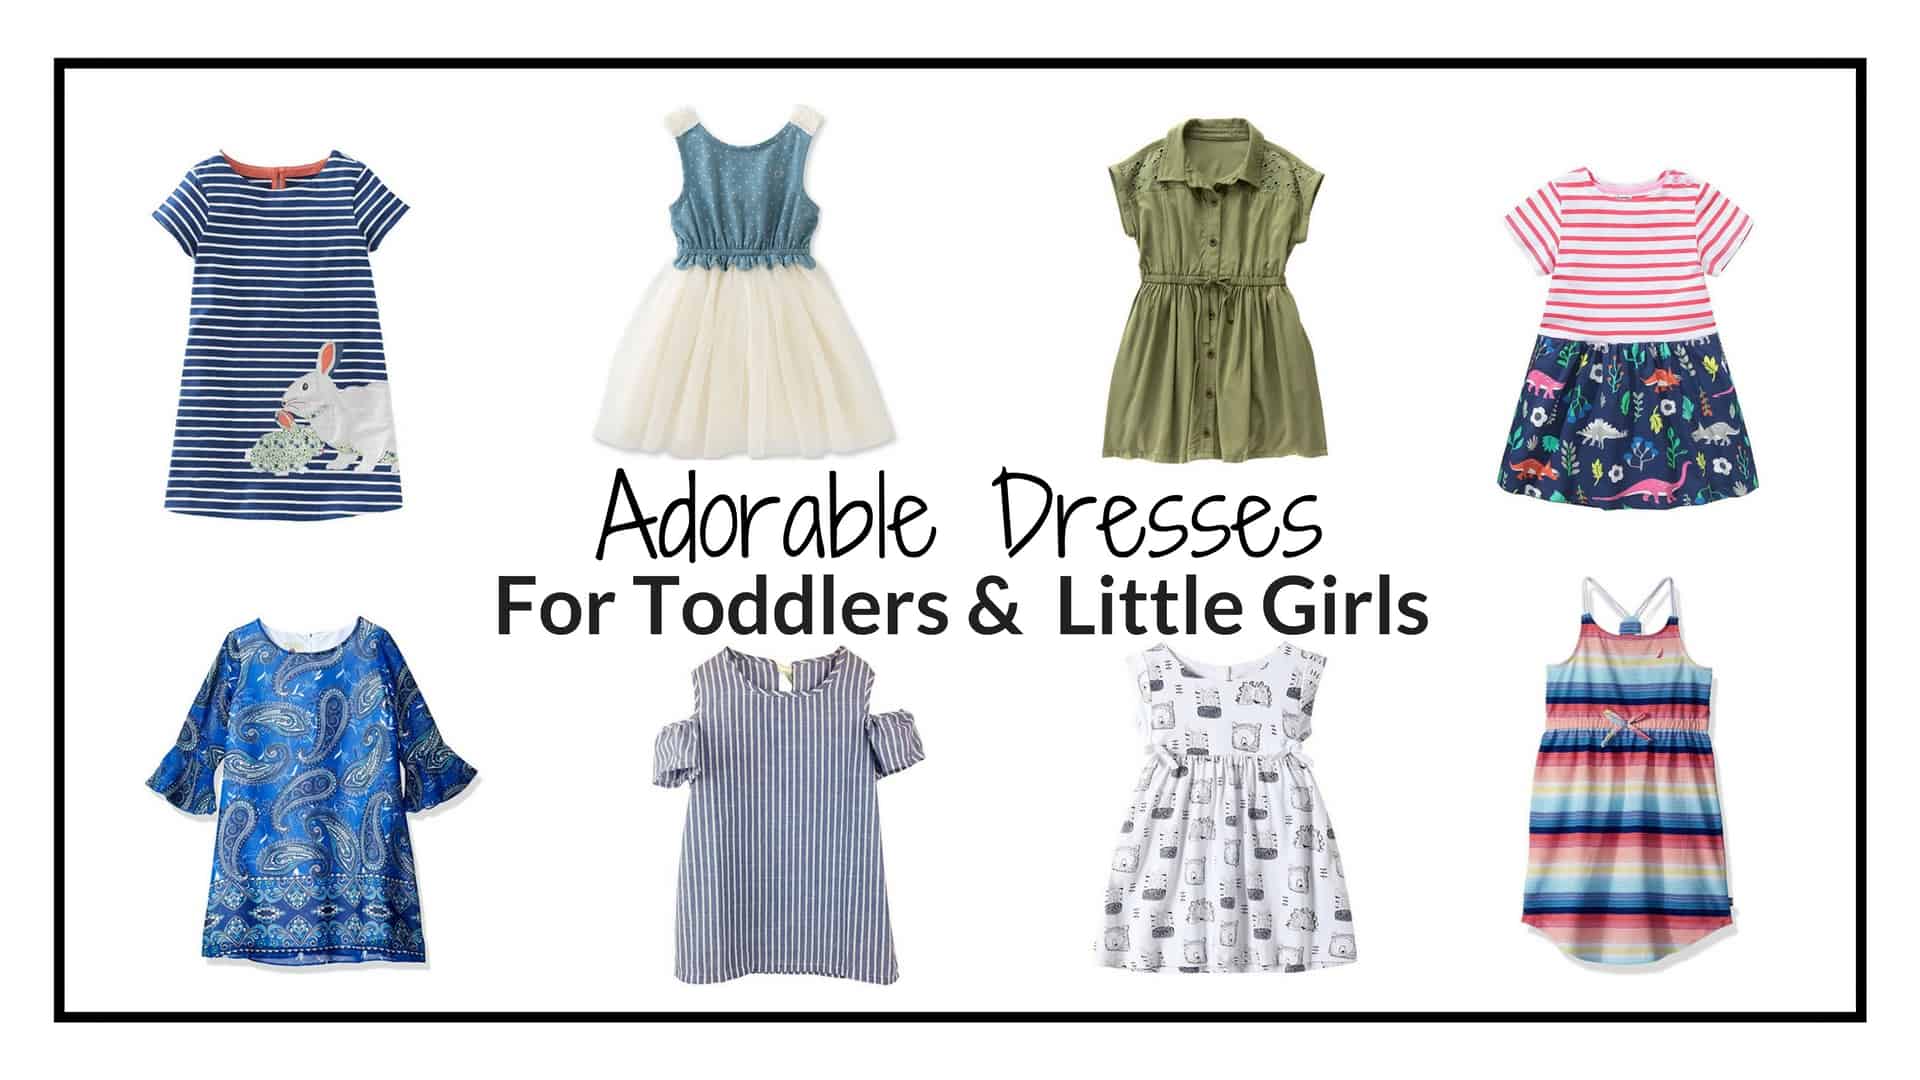 Image graphic of Adorable Dresses for Toddlers & Little Girls.